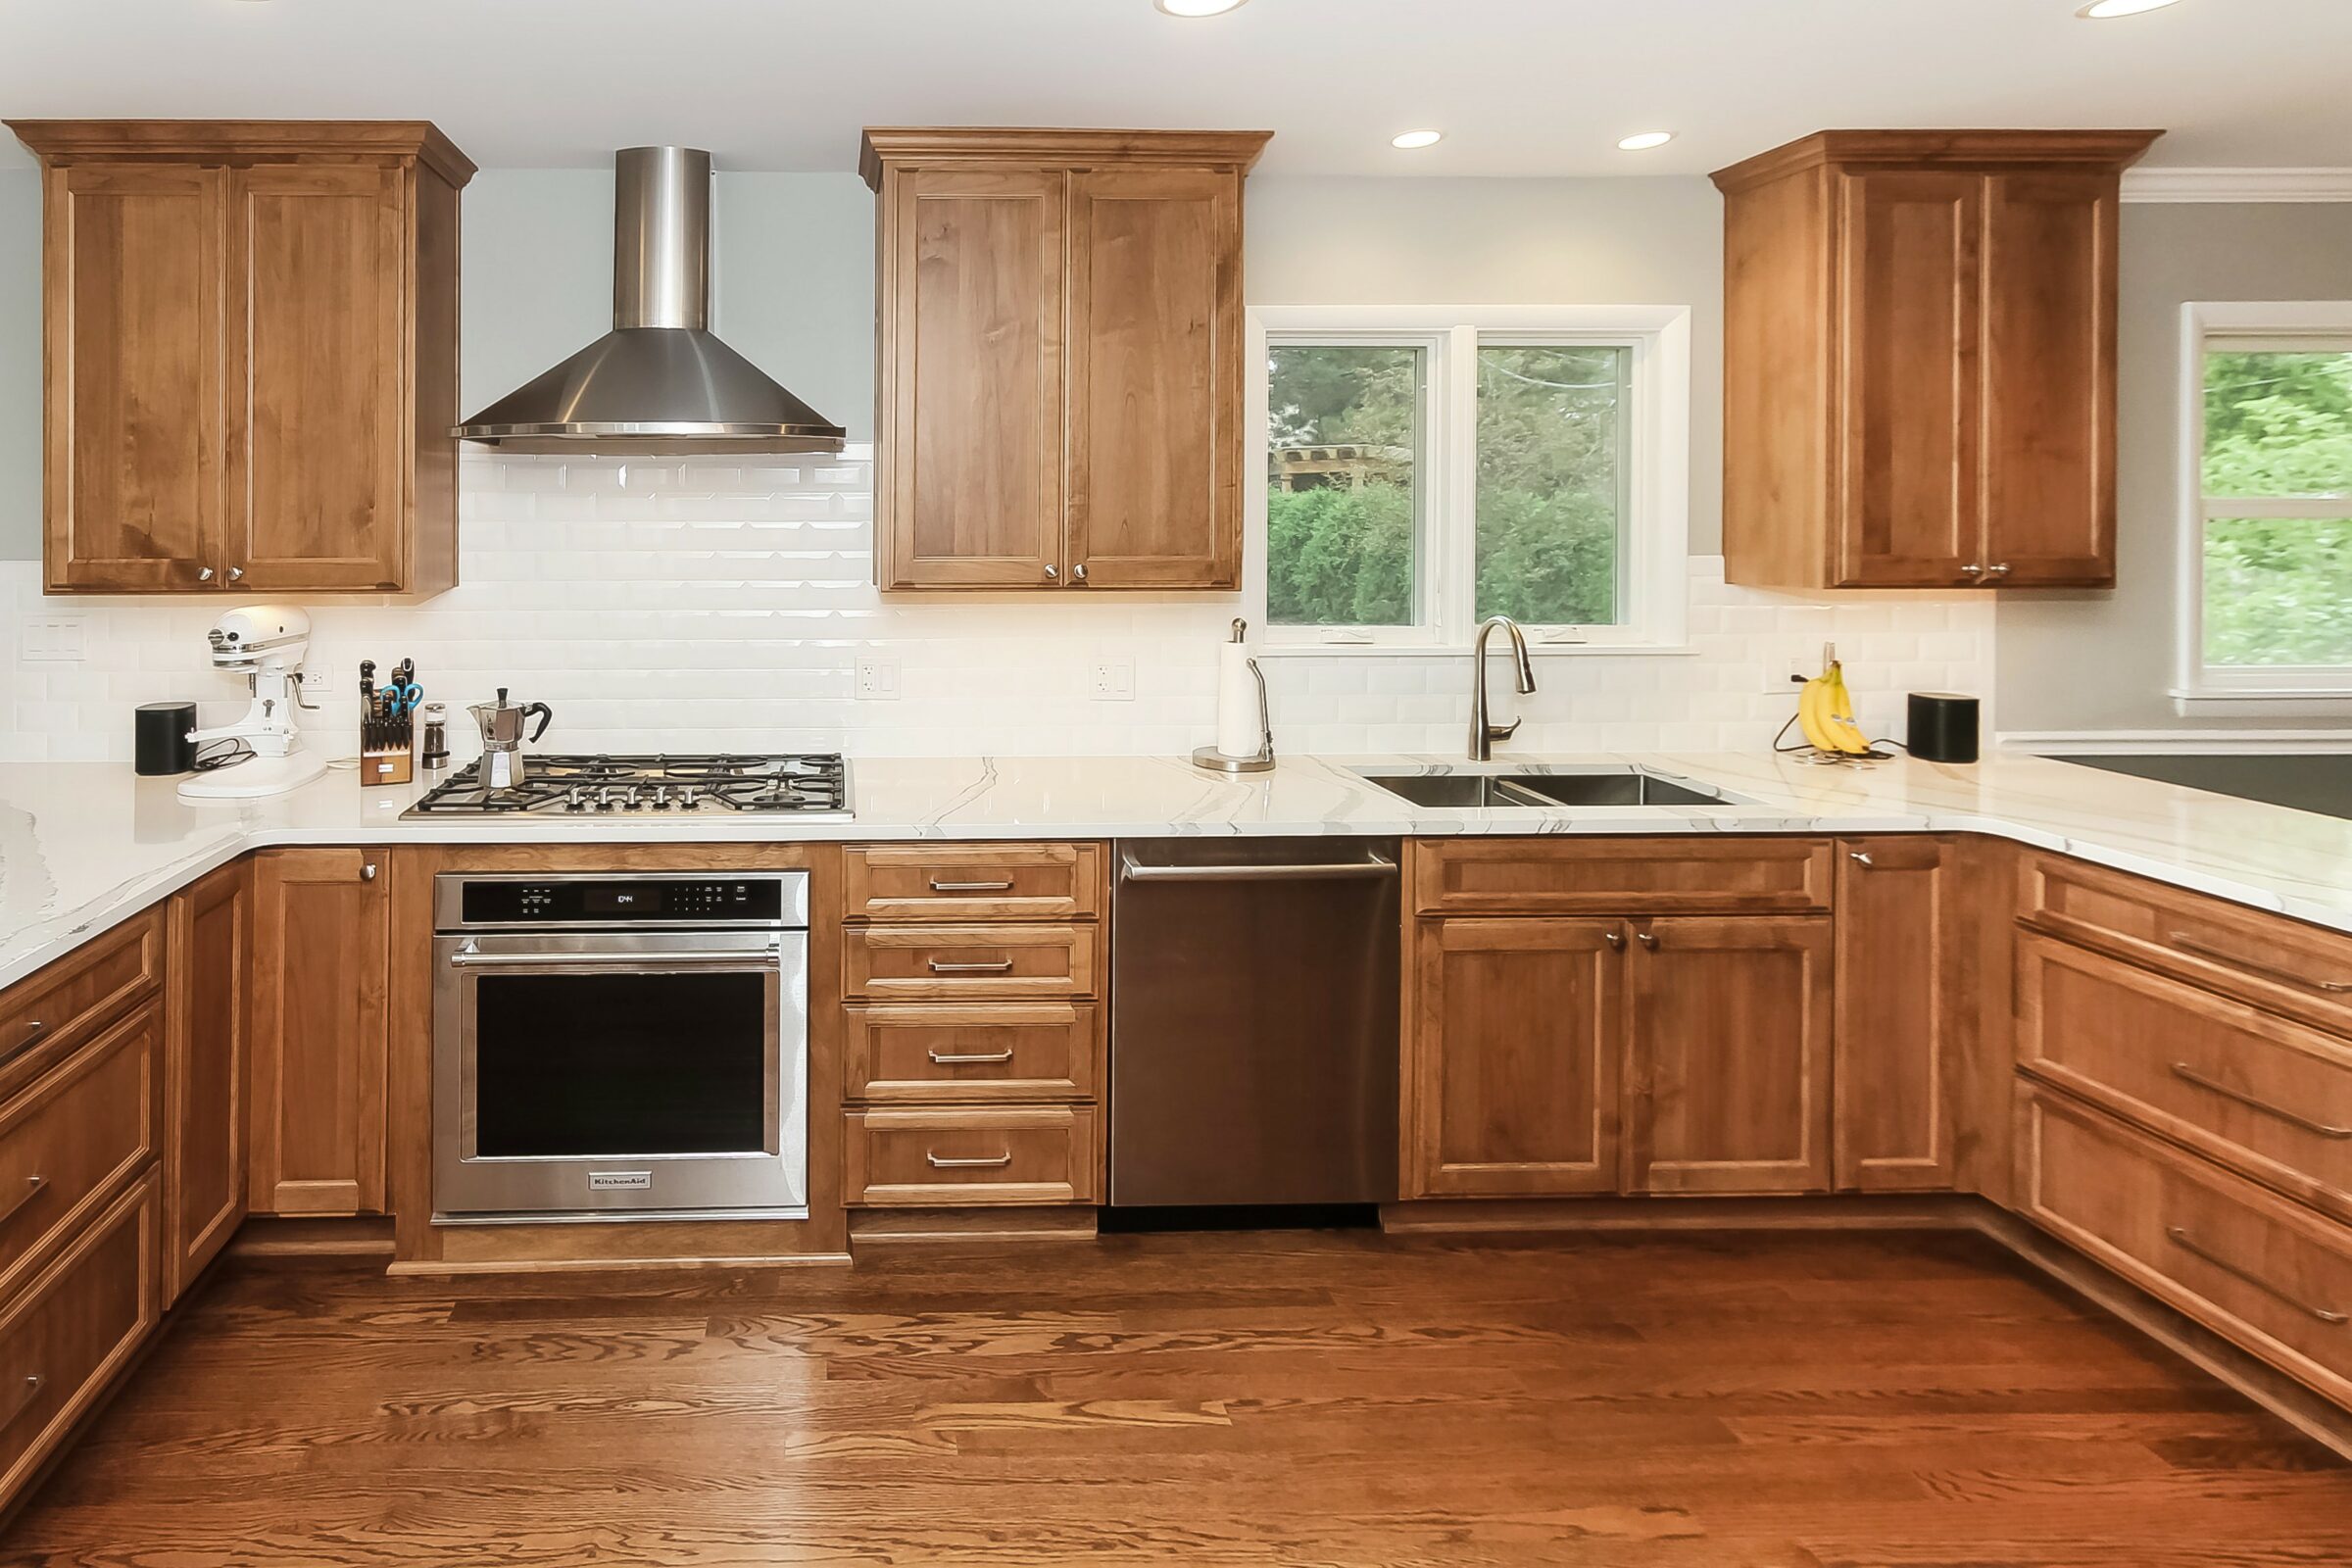 Kitchen designer in Palatine, Patrick A. Finn - Custom Homes and Remodeling